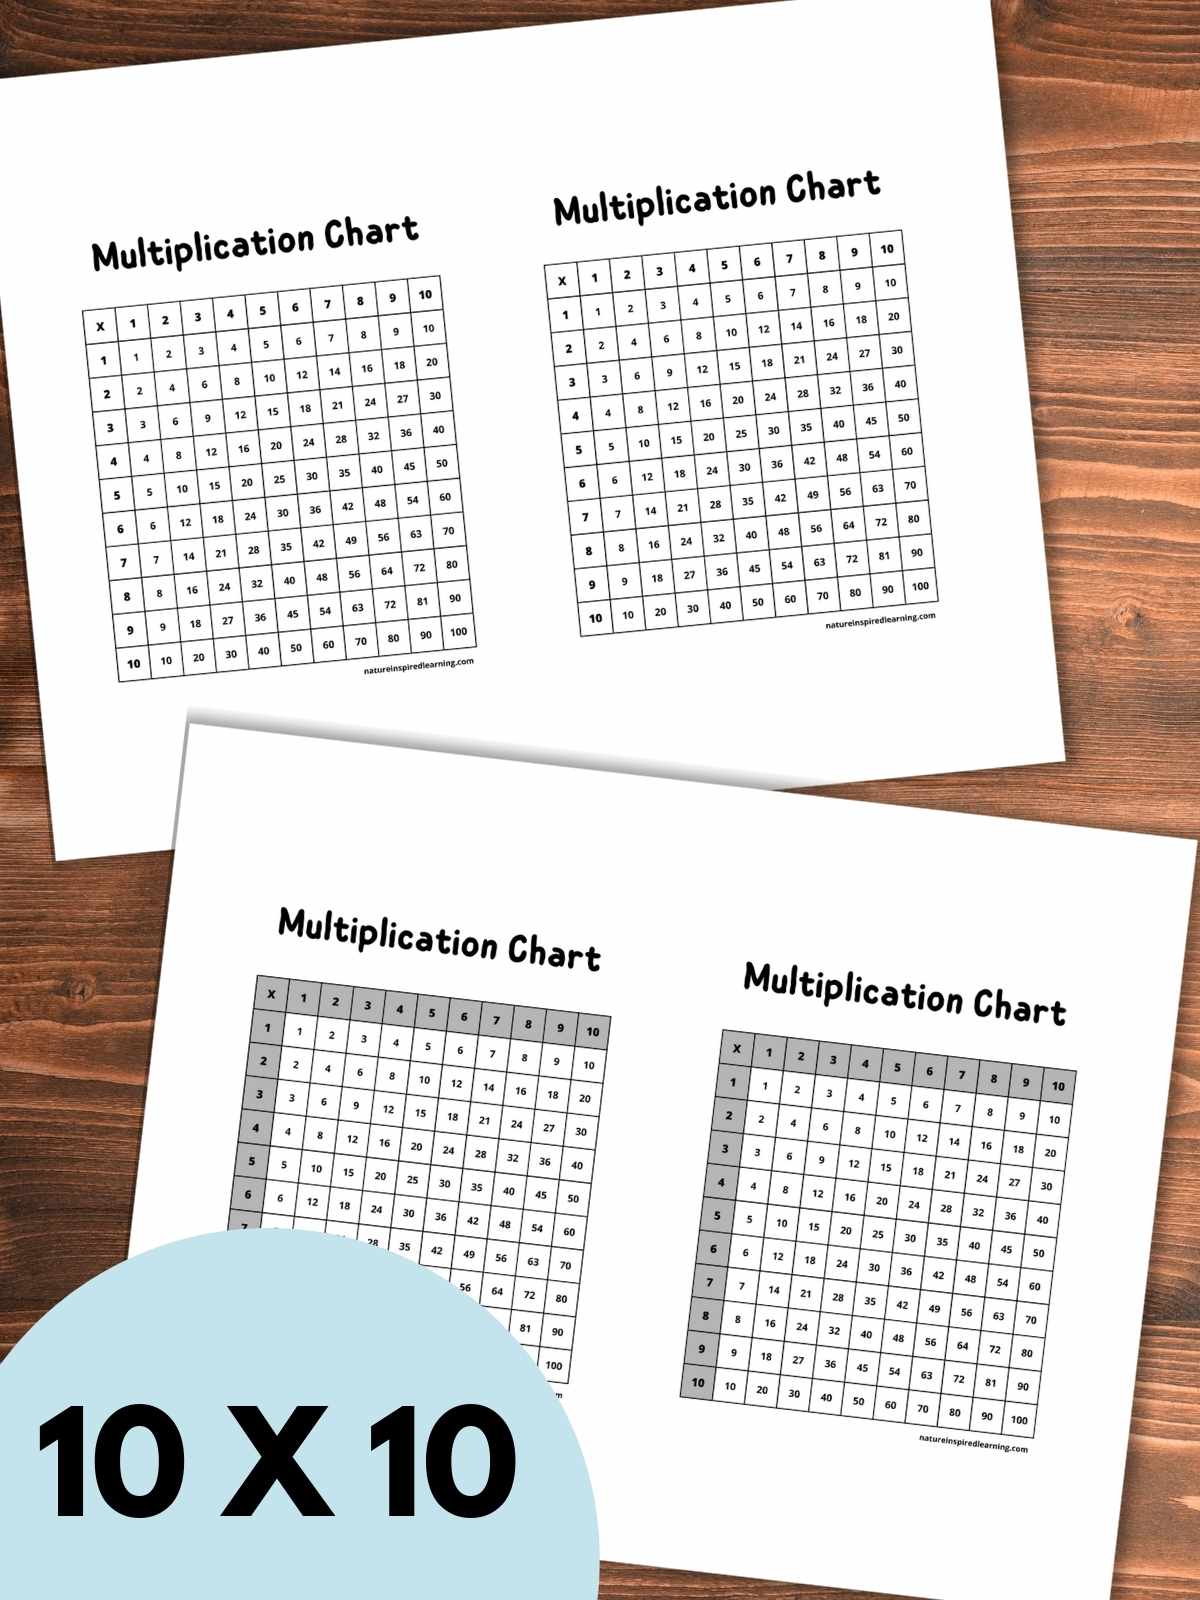 Two printables with two 10 by 10 multiplication grids on each overlapping on a wooden background. Light blue half circle with text overlay bottom left corner